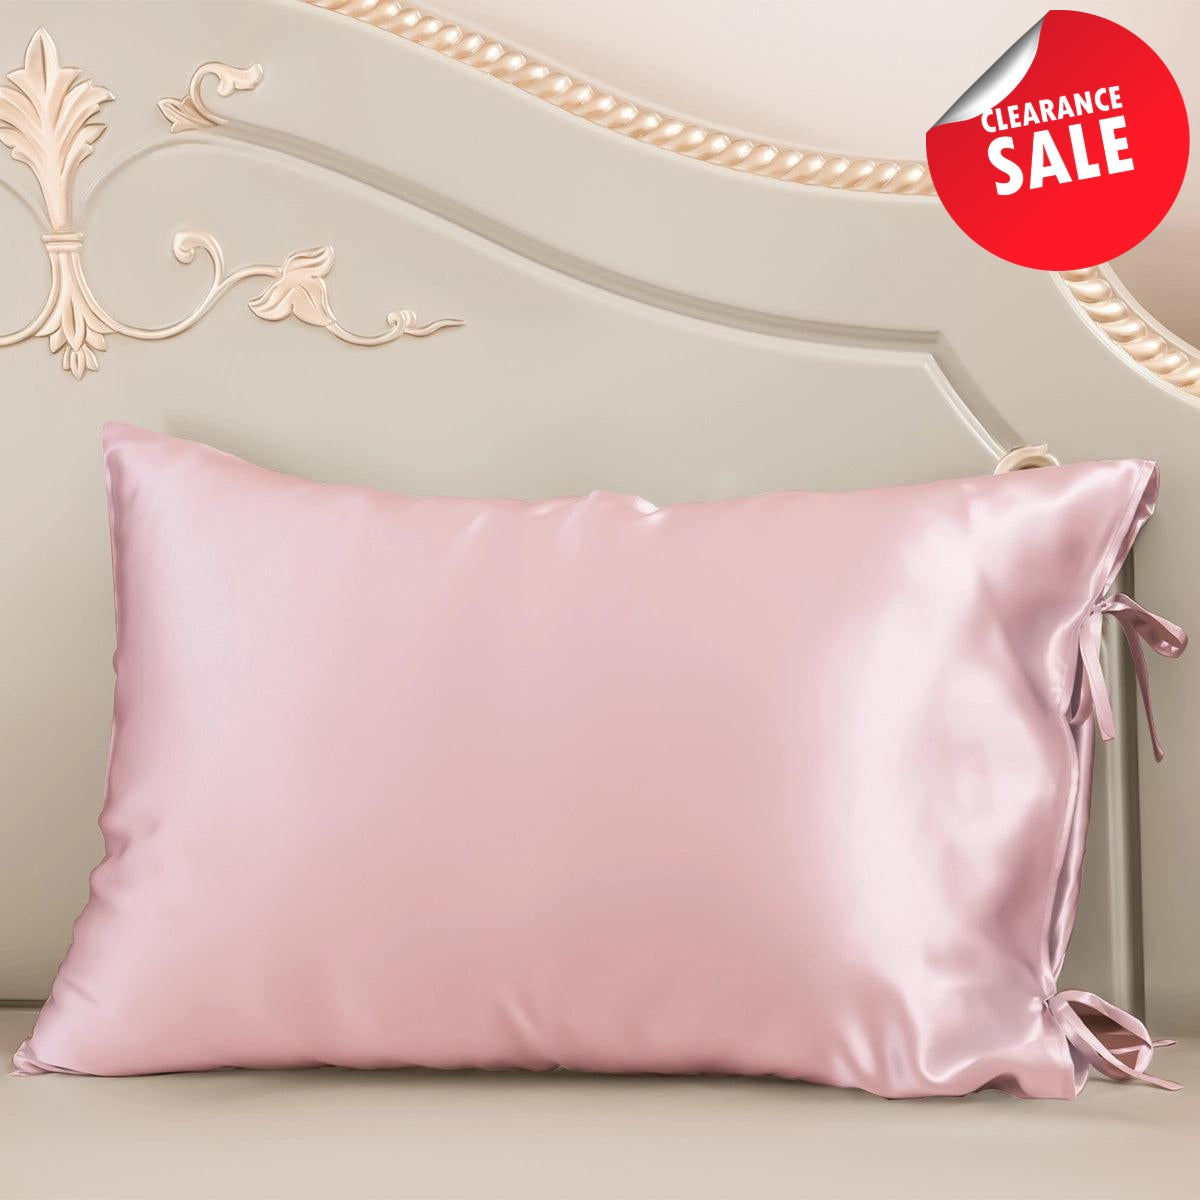 23 mm 6A+ Silk Pillowcase With Envelope With Laundry Bag